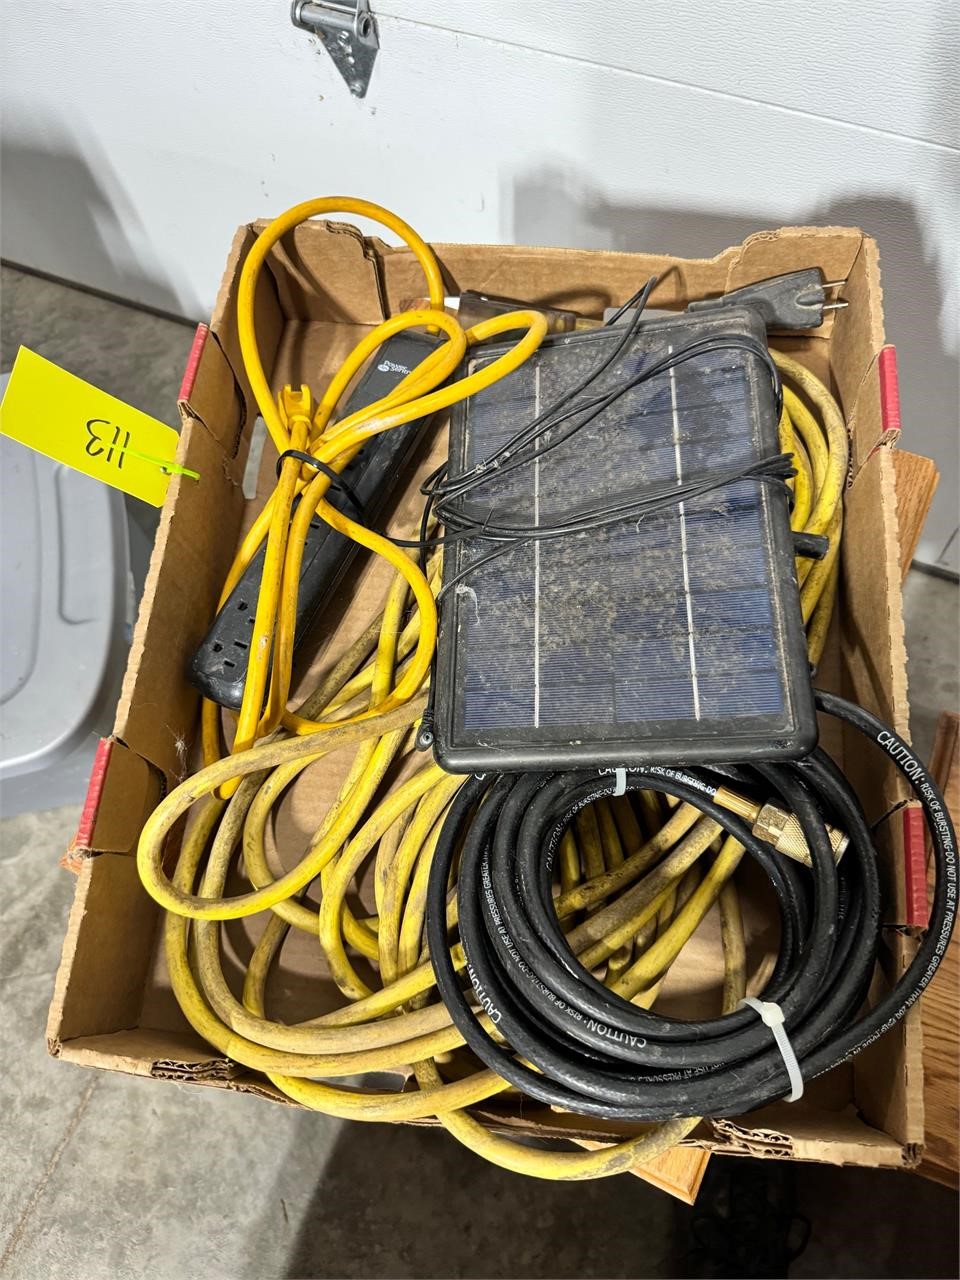 Solar panel and extension cord lot